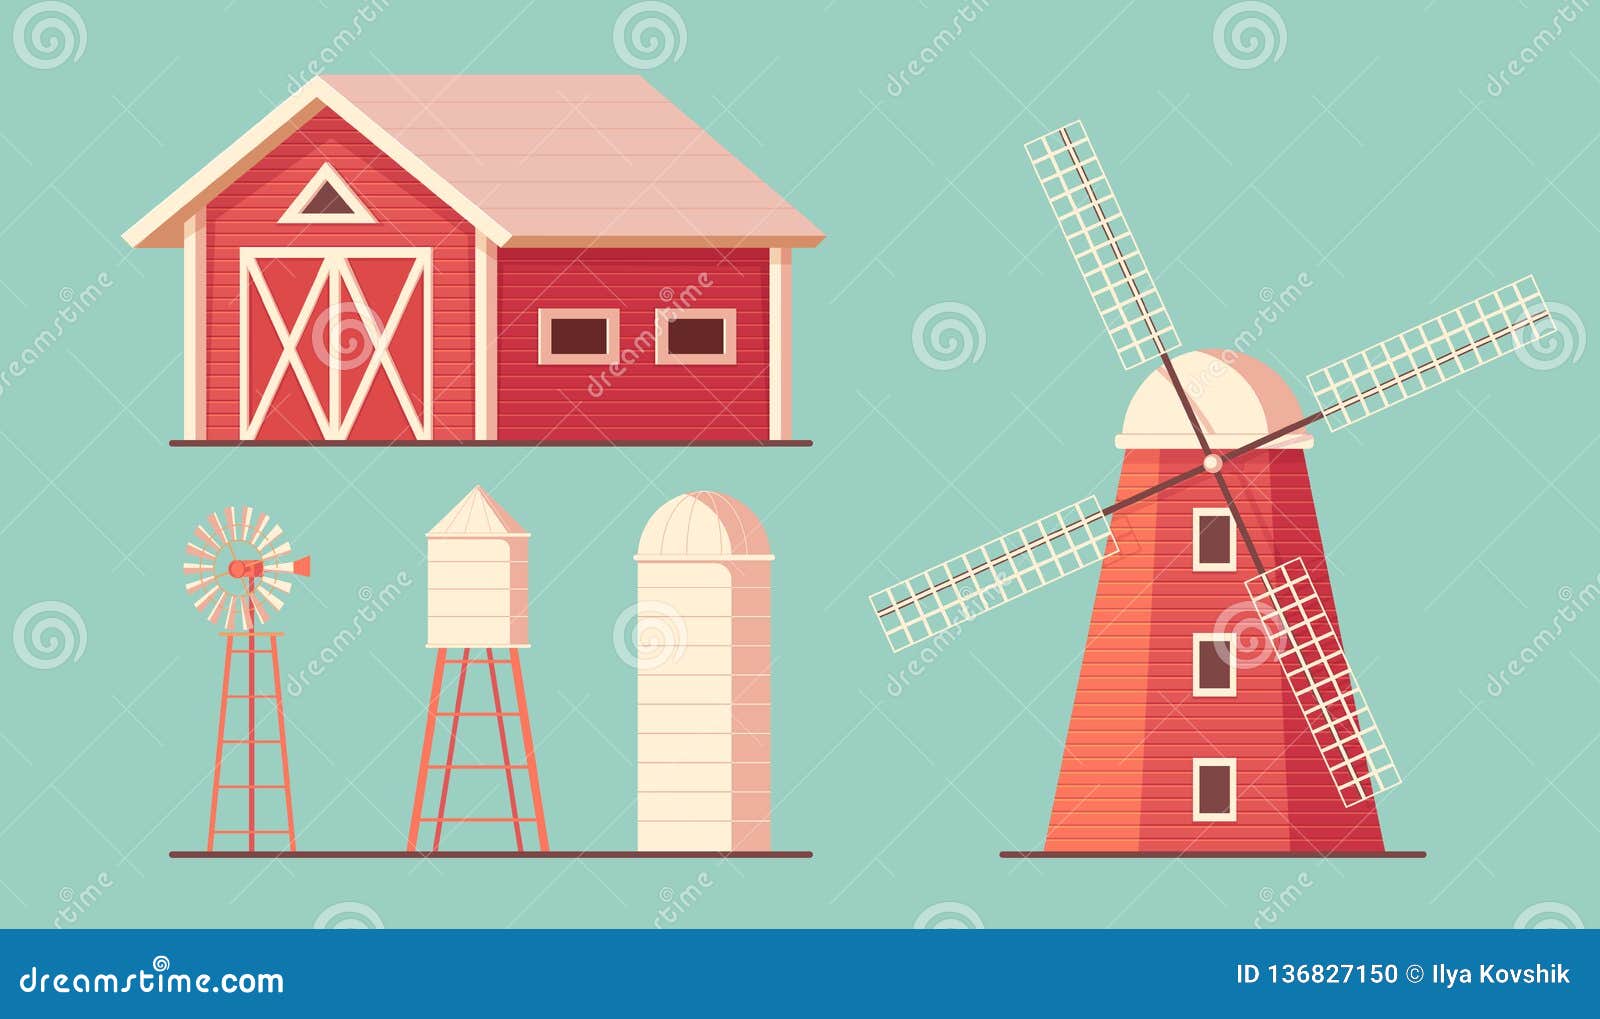 agriculture. farm building. drinking water tower. windmill waterpump and silo srorage barn for corn and harvest.